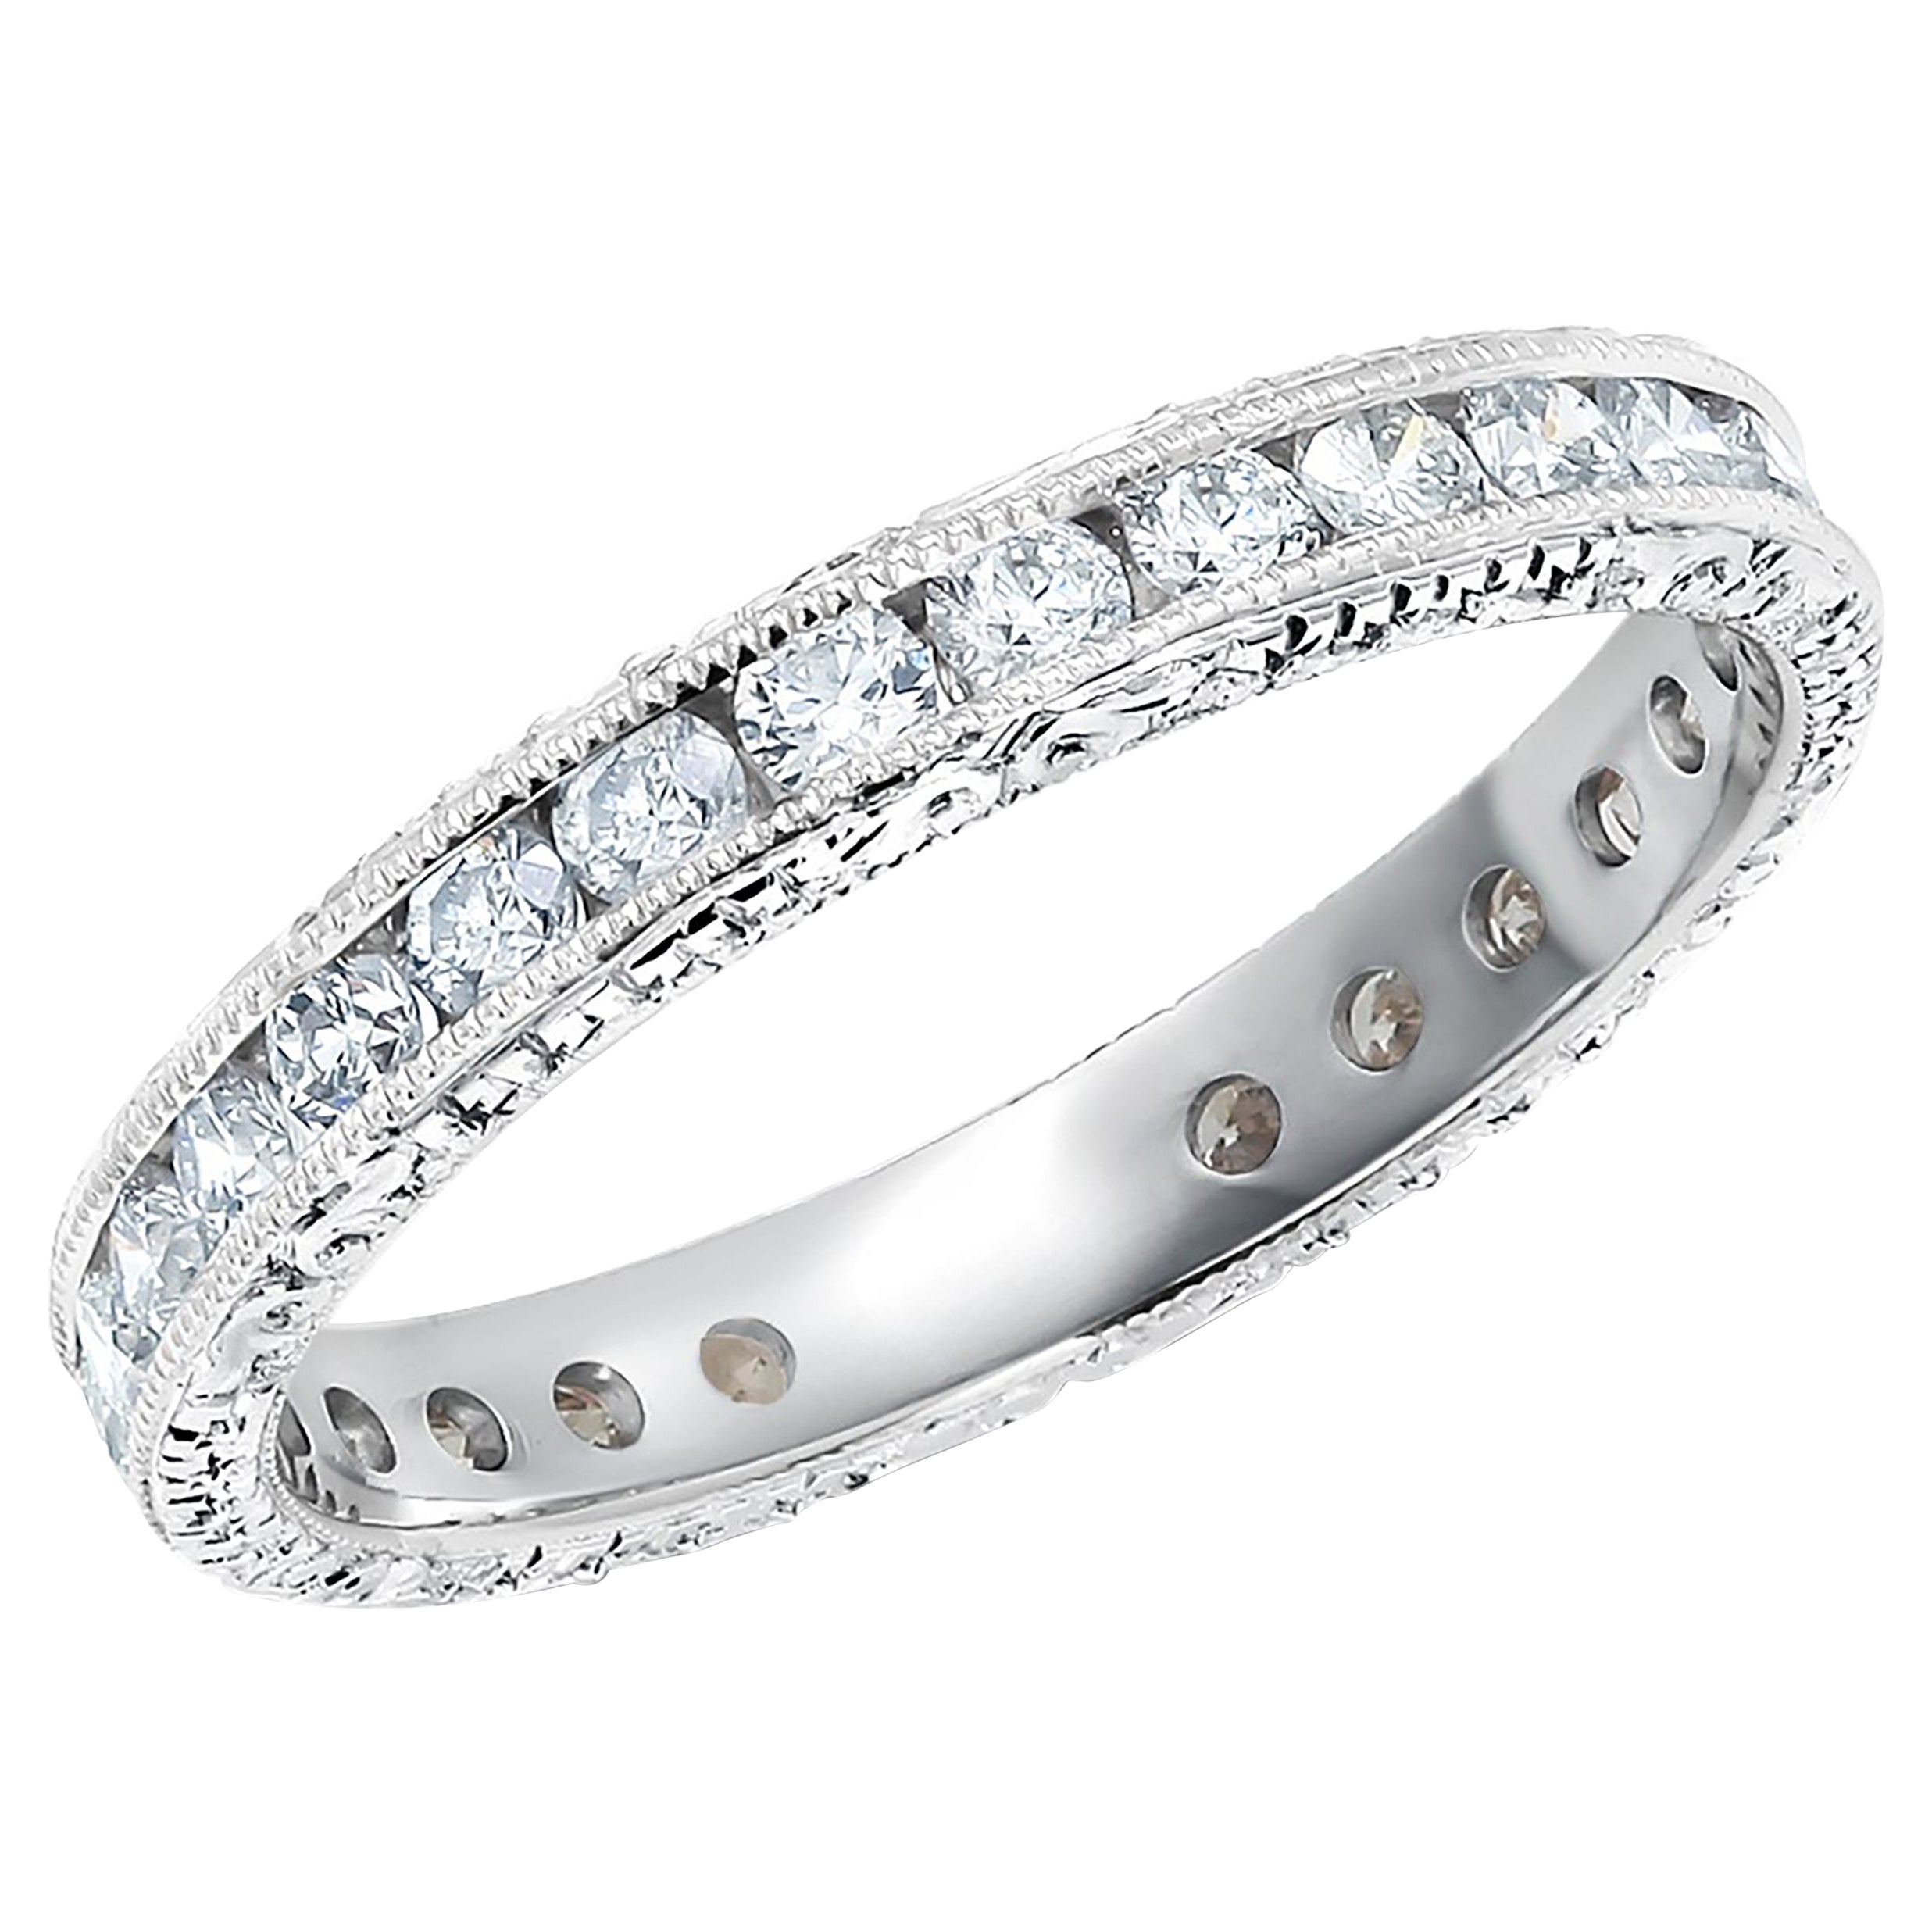 Platinum Channel Set Diamond Eternity Band with Old Master Hand Engraving